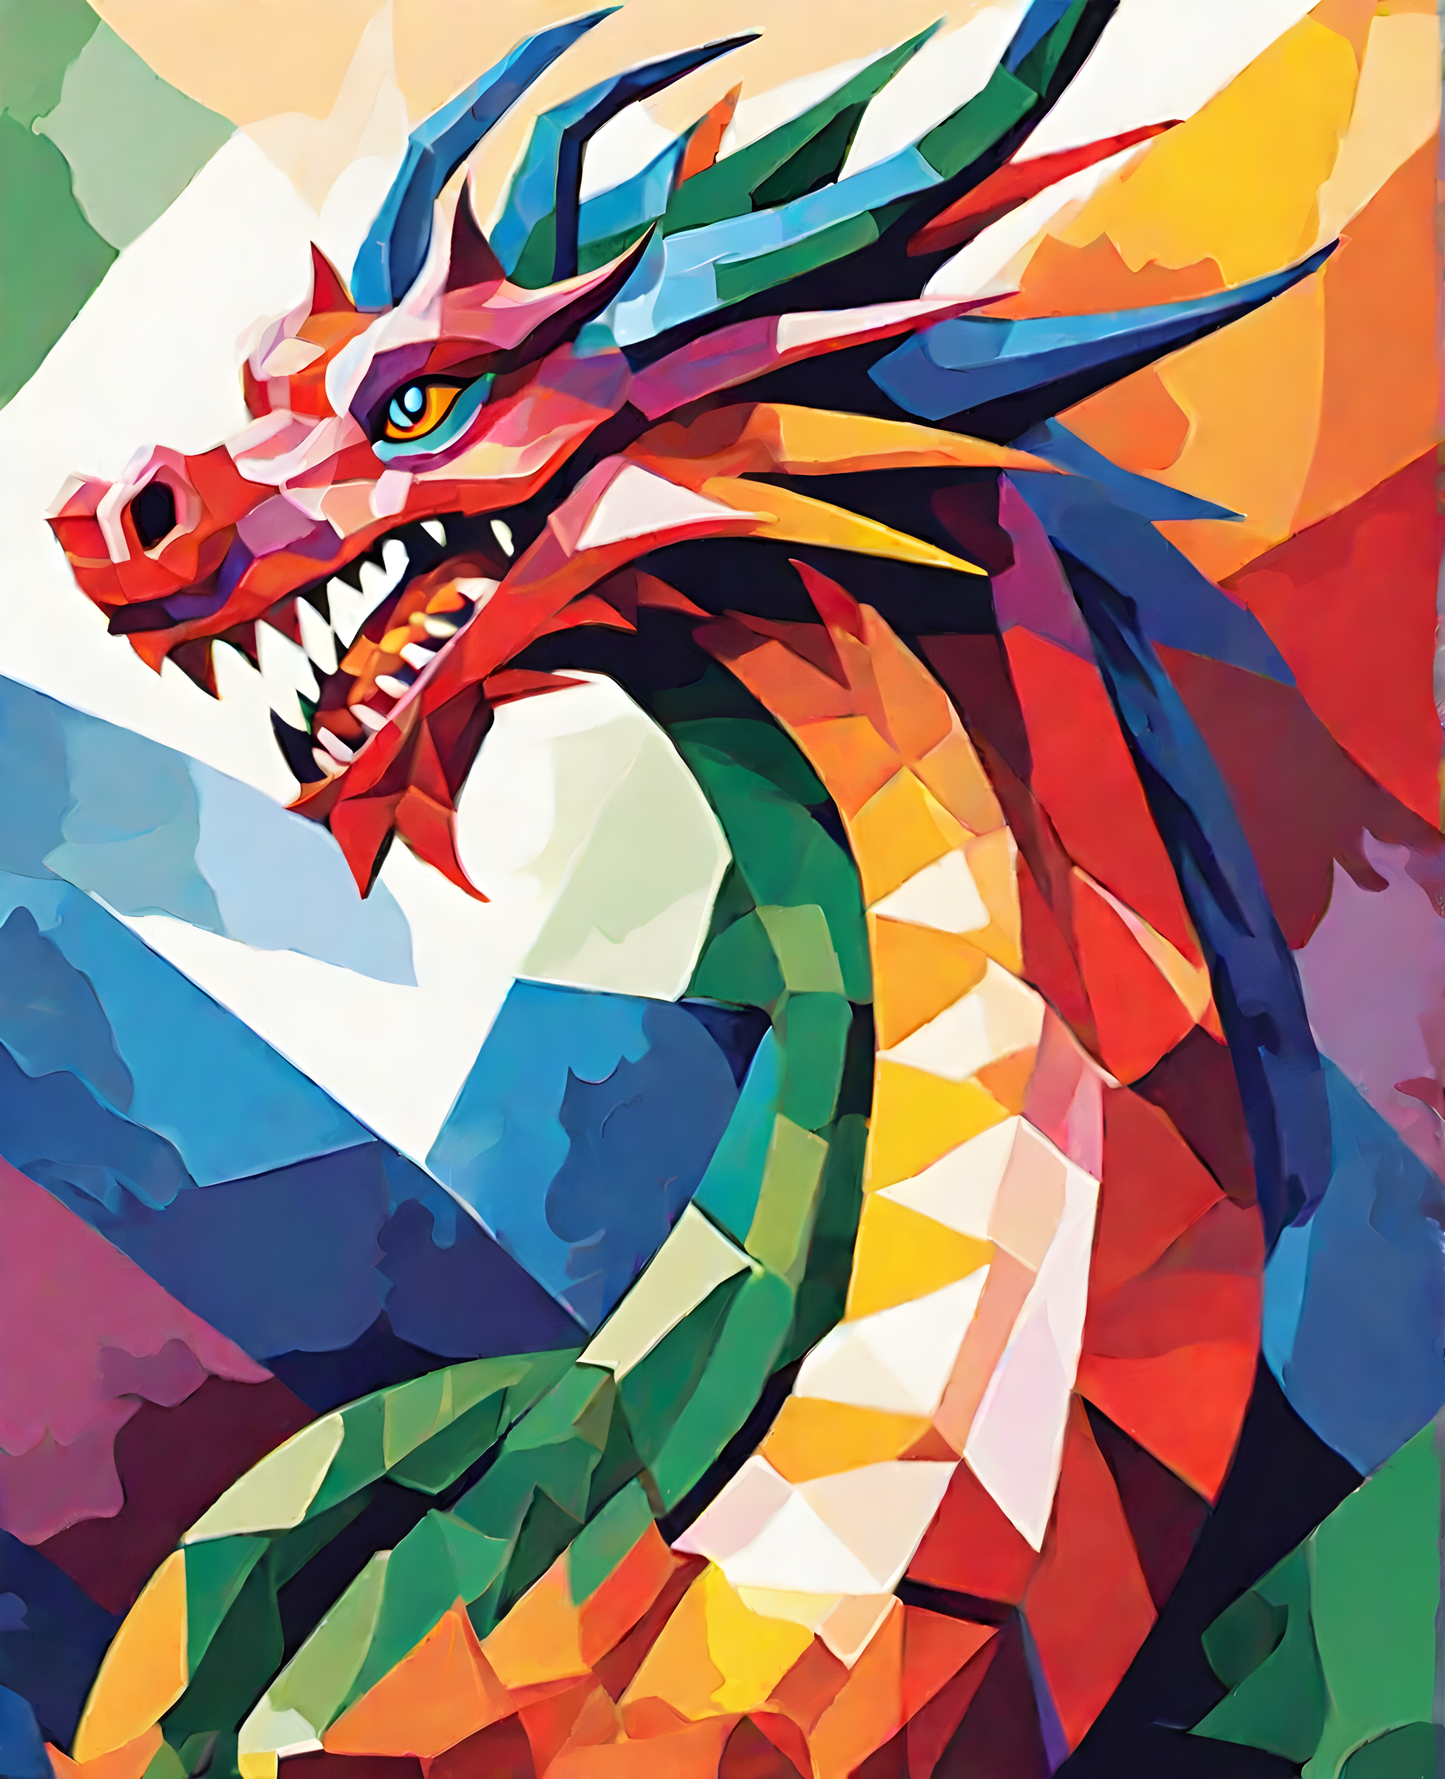 China Collection PD (9) - Colorful Dragon - Van-Go Paint-By-Number Kit